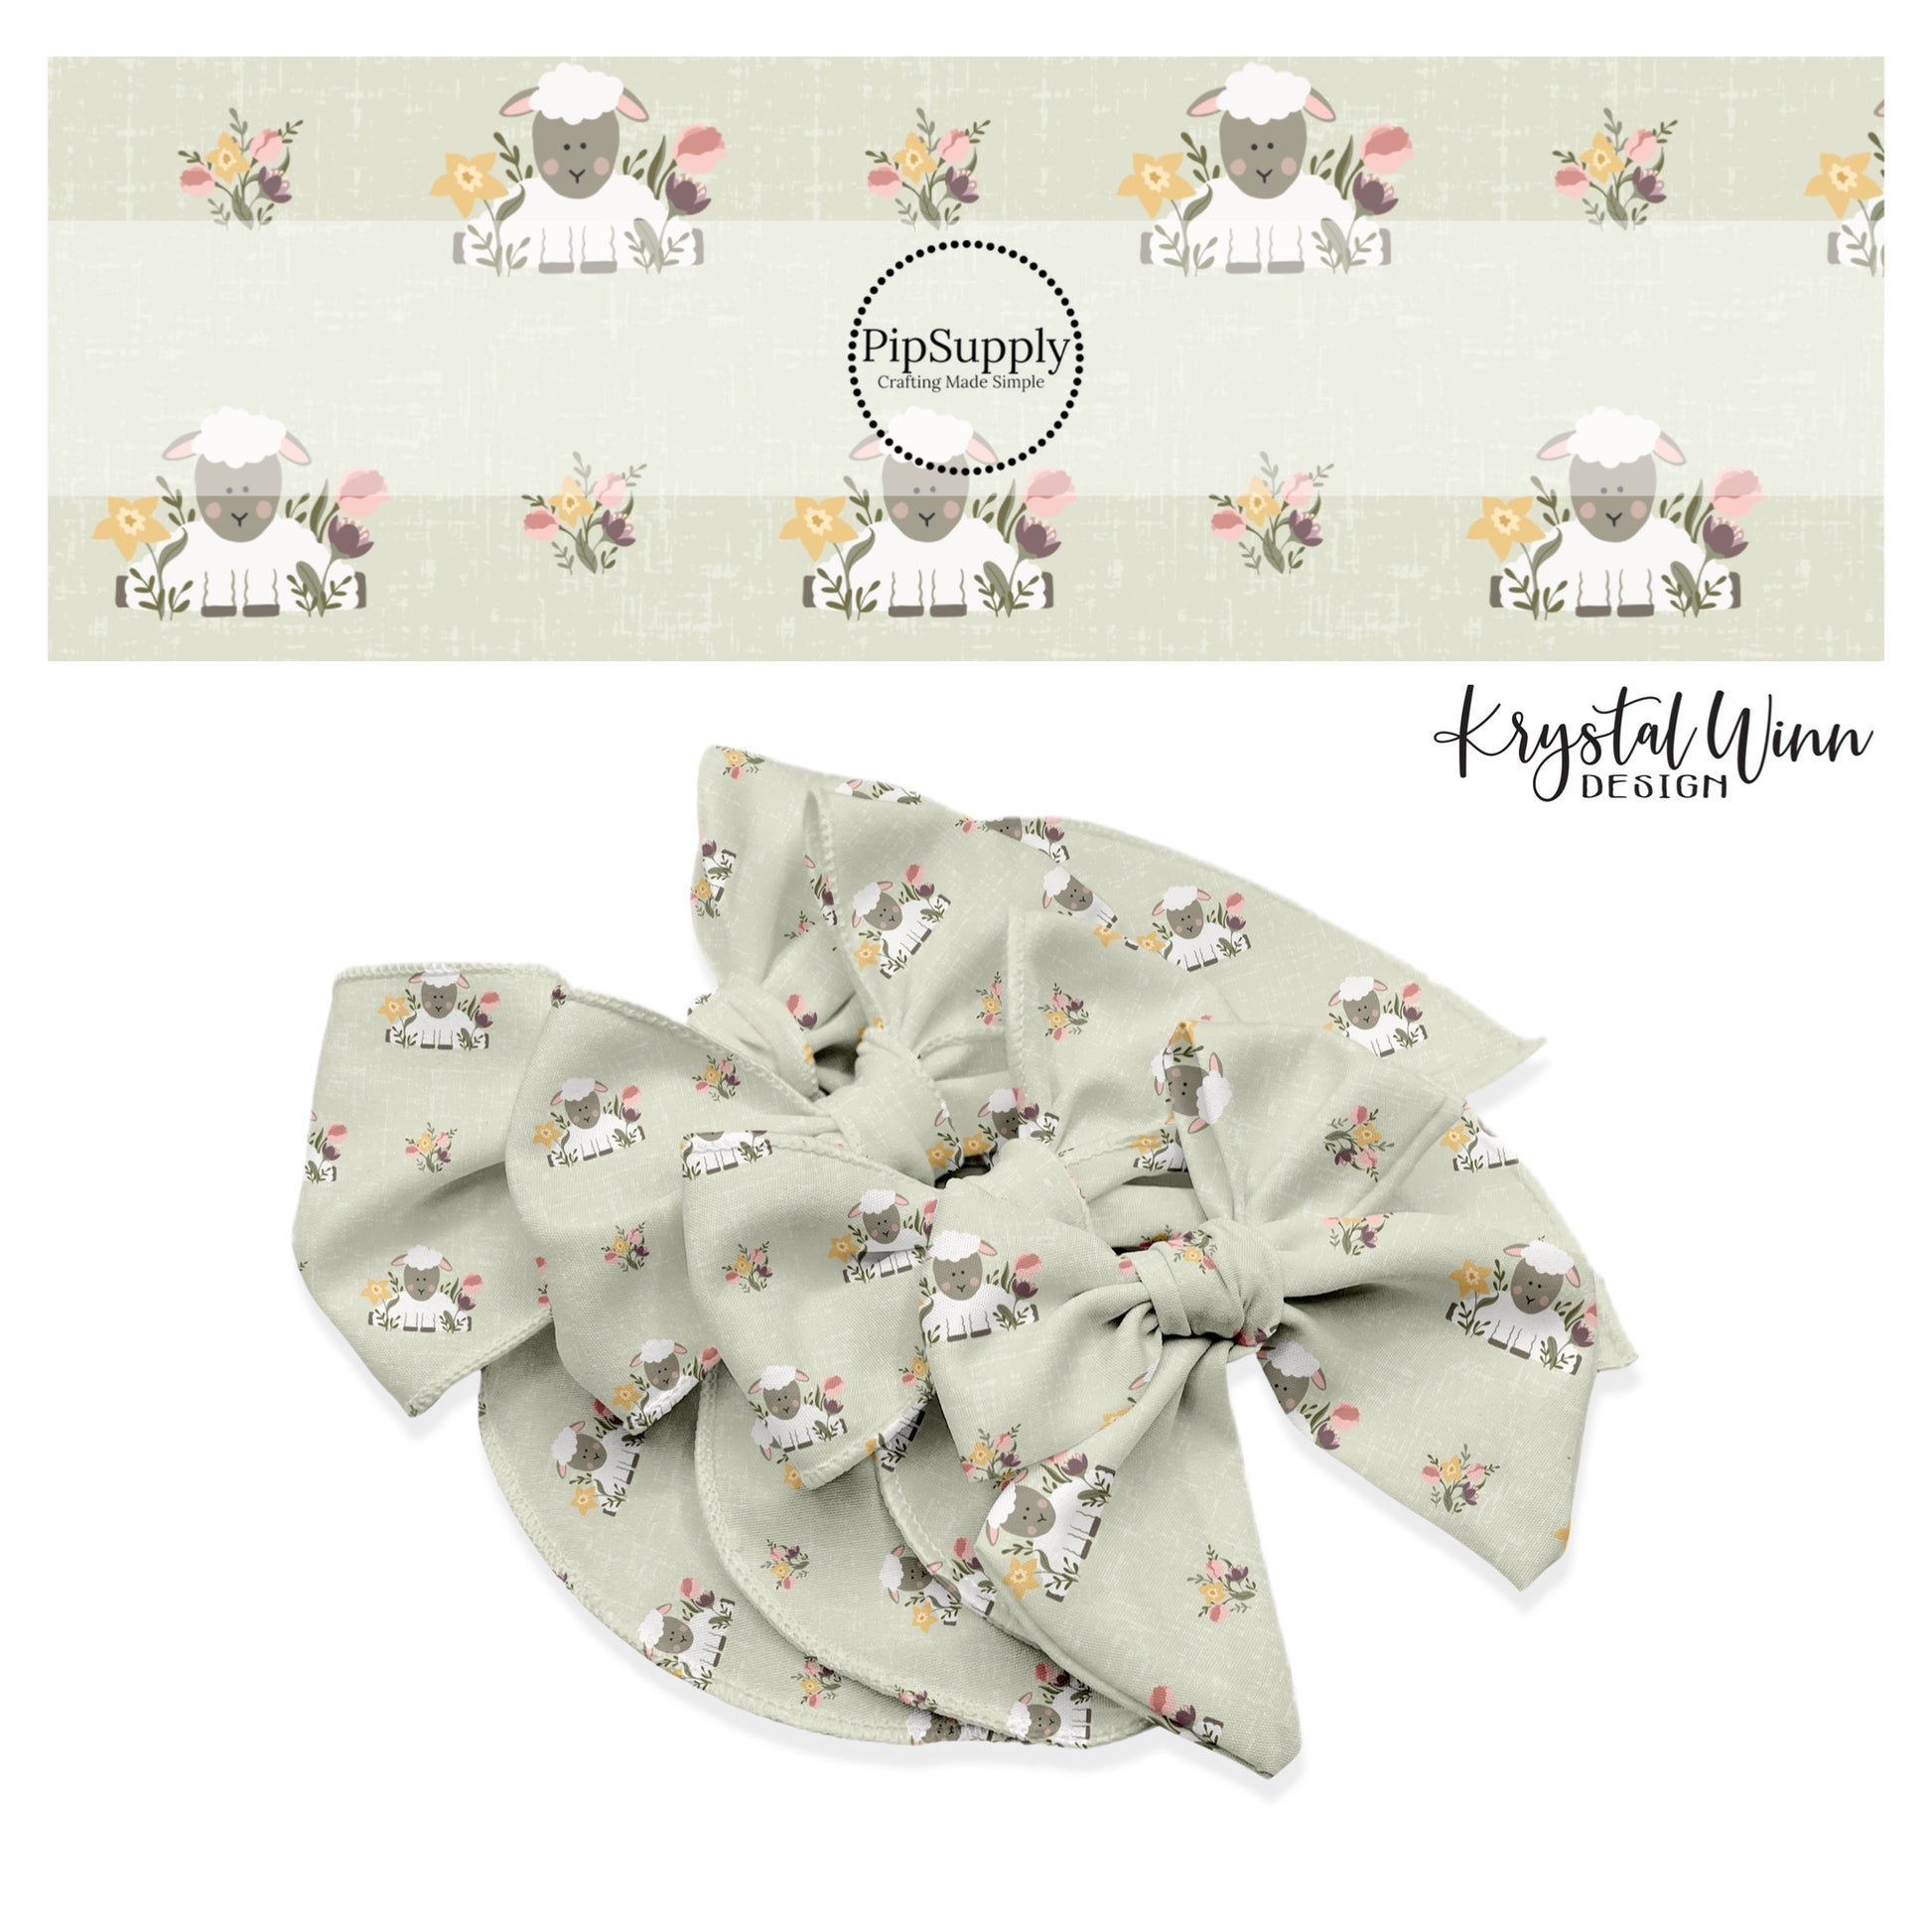 Baby white sheep with blushing cheeks and gray face in a field of yellow, pink, and purple flowers on a sage distressed bow strip